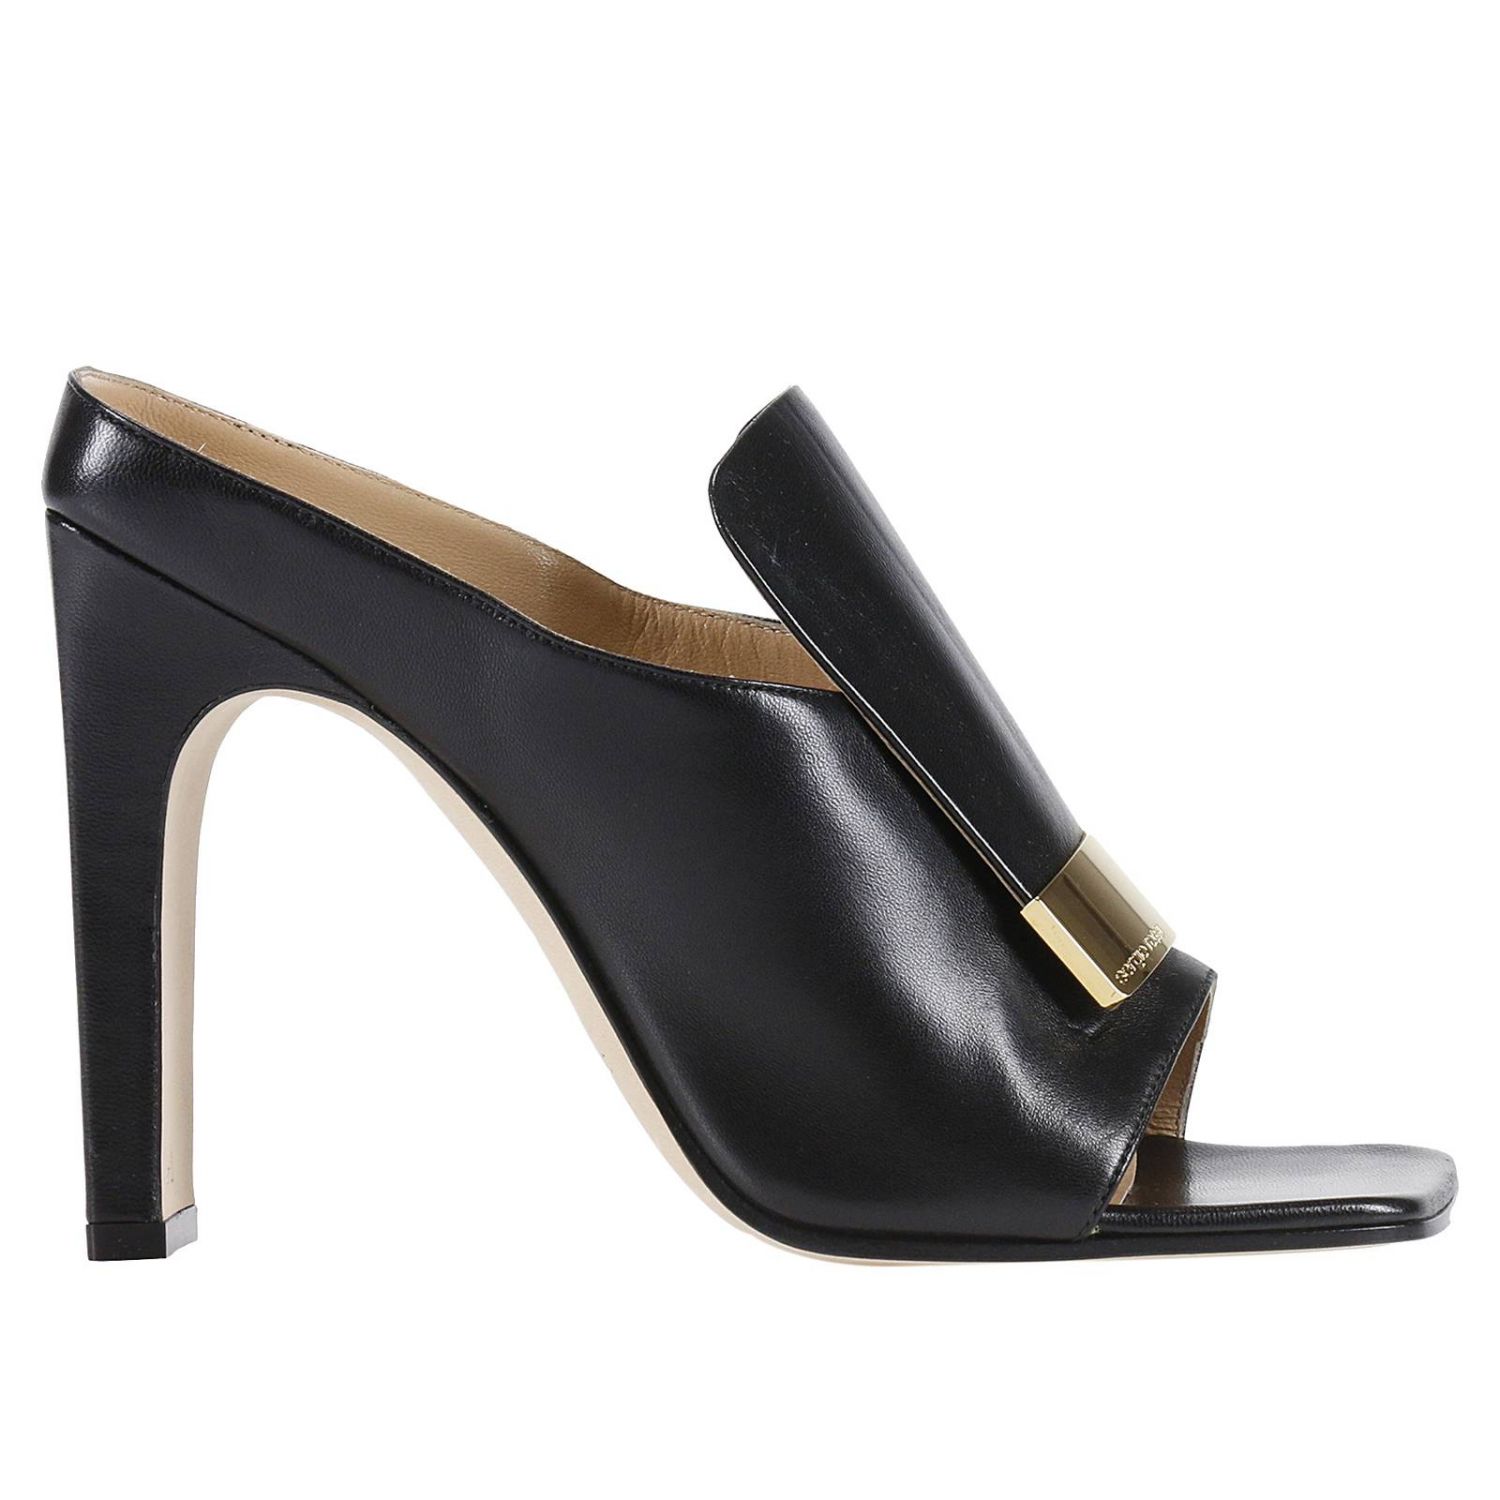 Sergio Rossi Outlet: Shoes women | High Heel Shoes Sergio Rossi Women ...